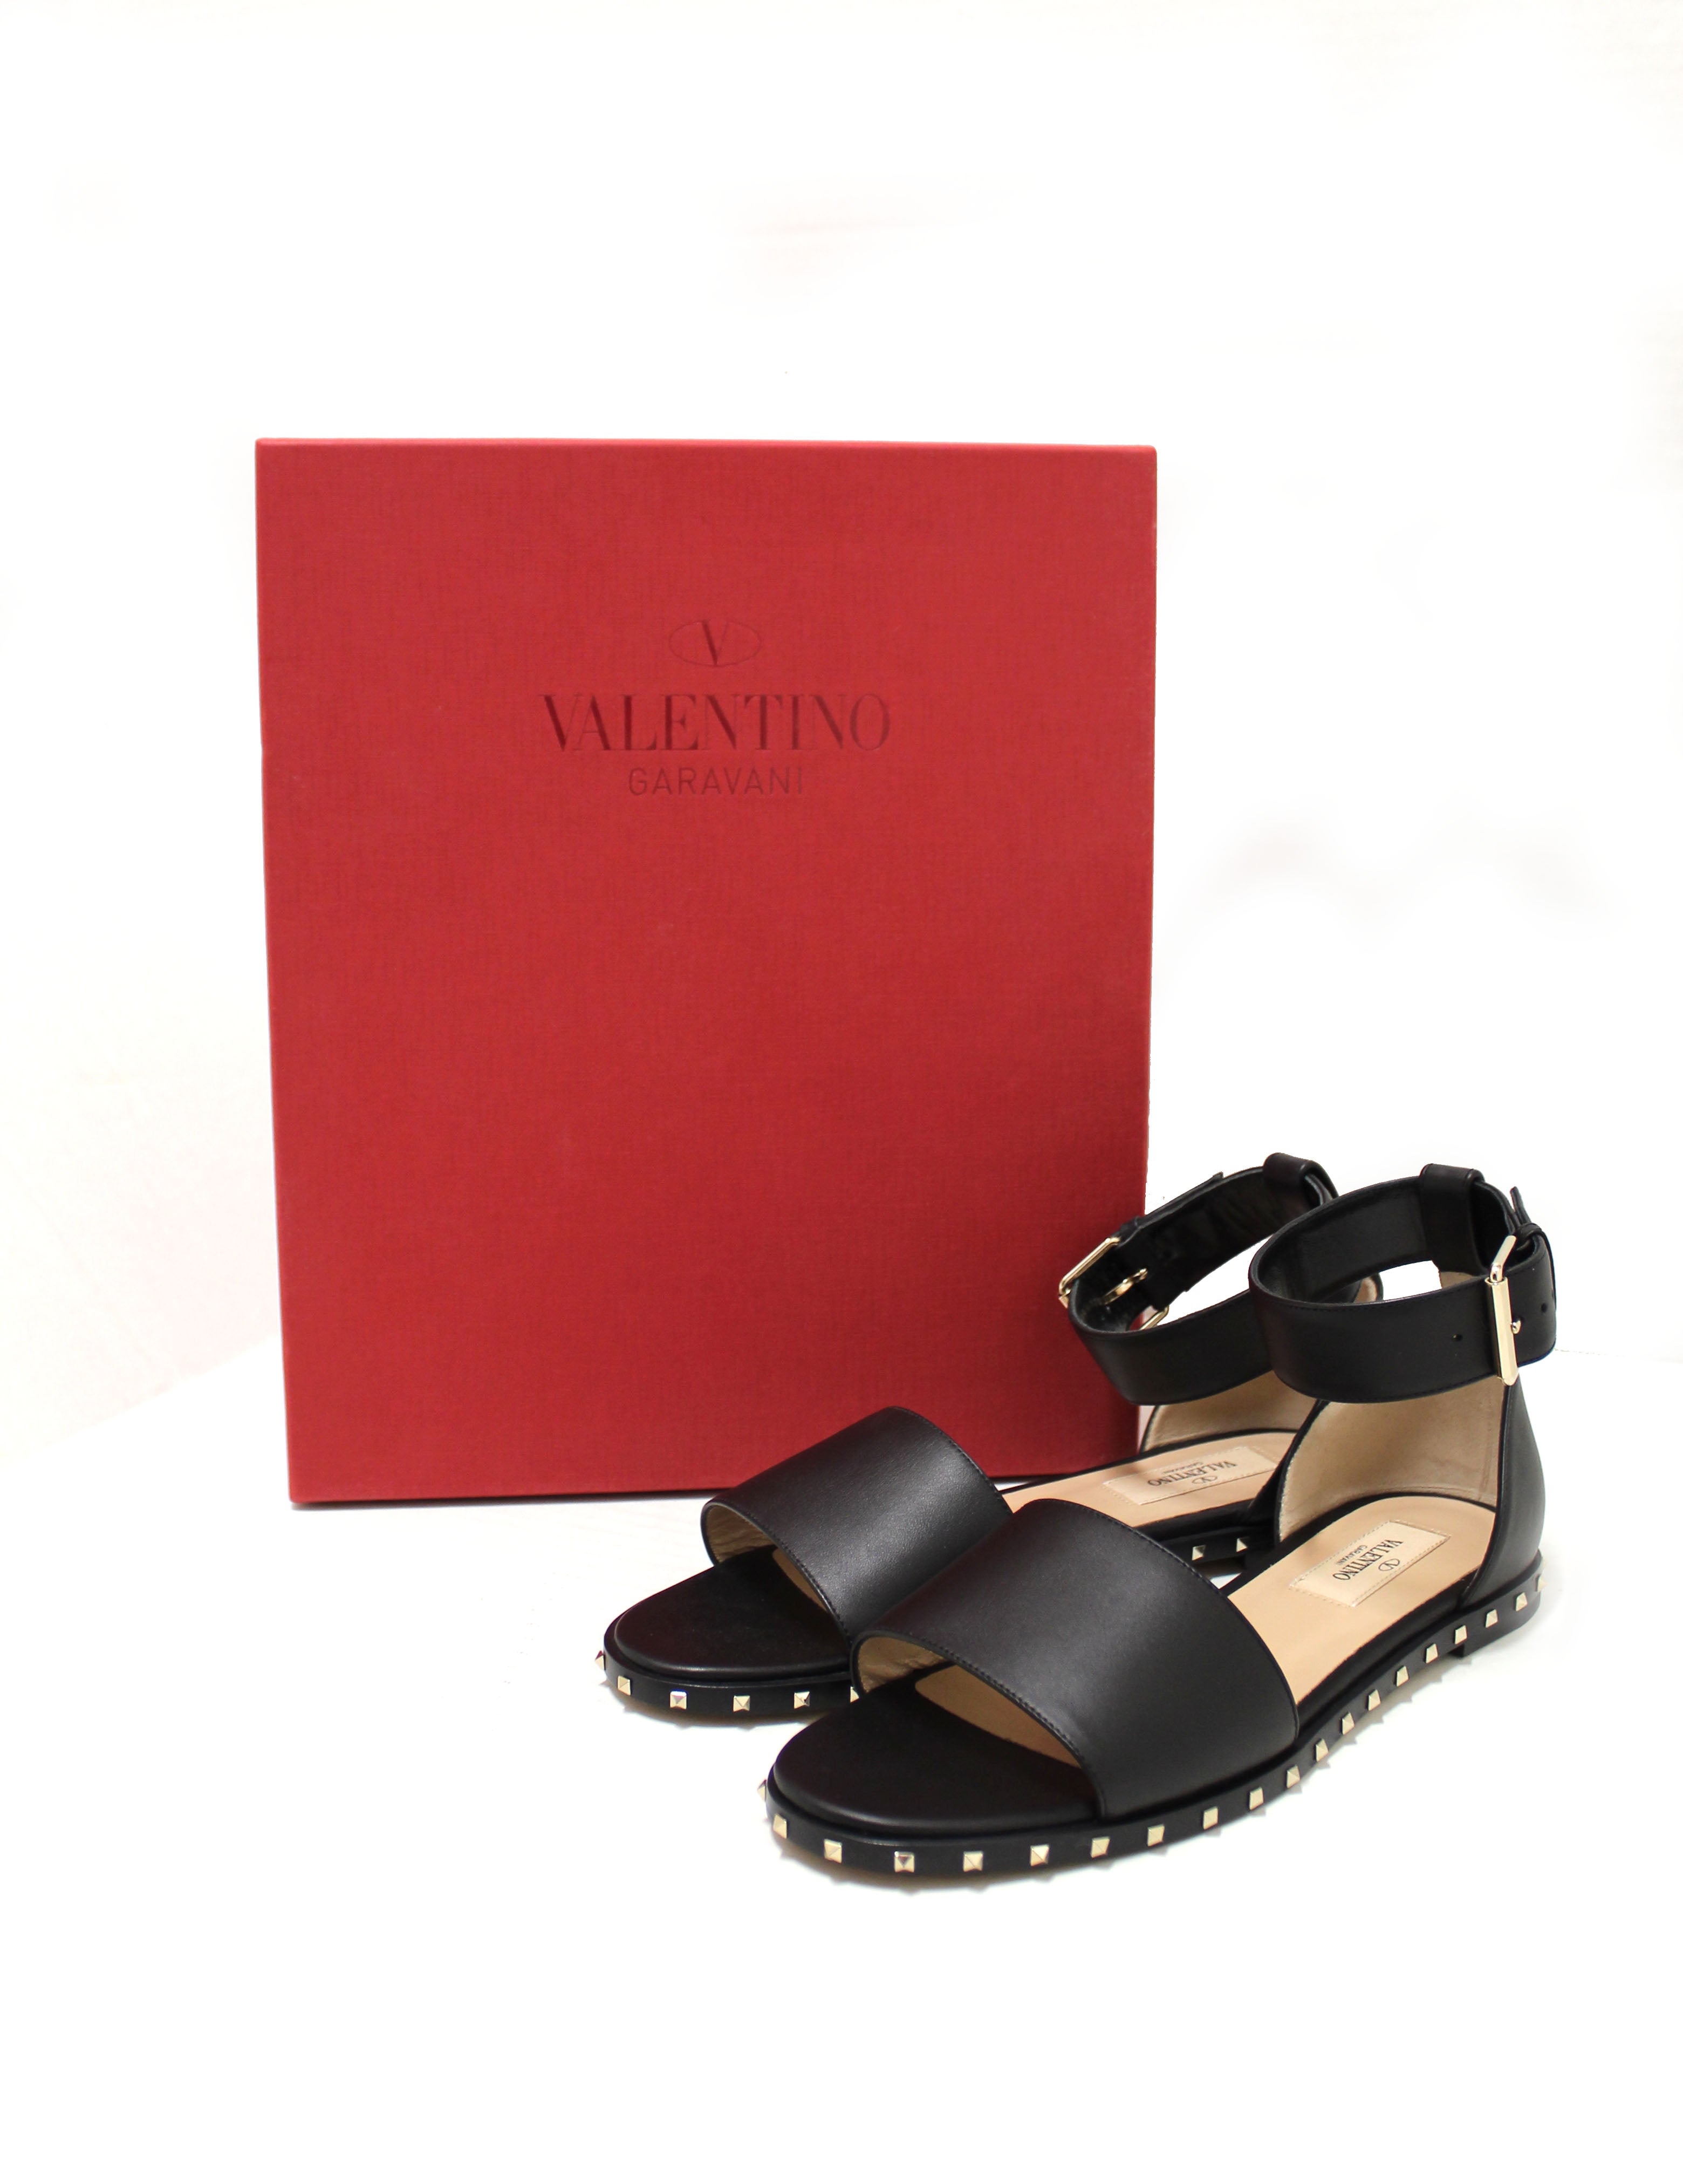 Authentic NEW Valentino Black Leather Thick Ankle Strap Studded Sandals Shoes Size 36.5